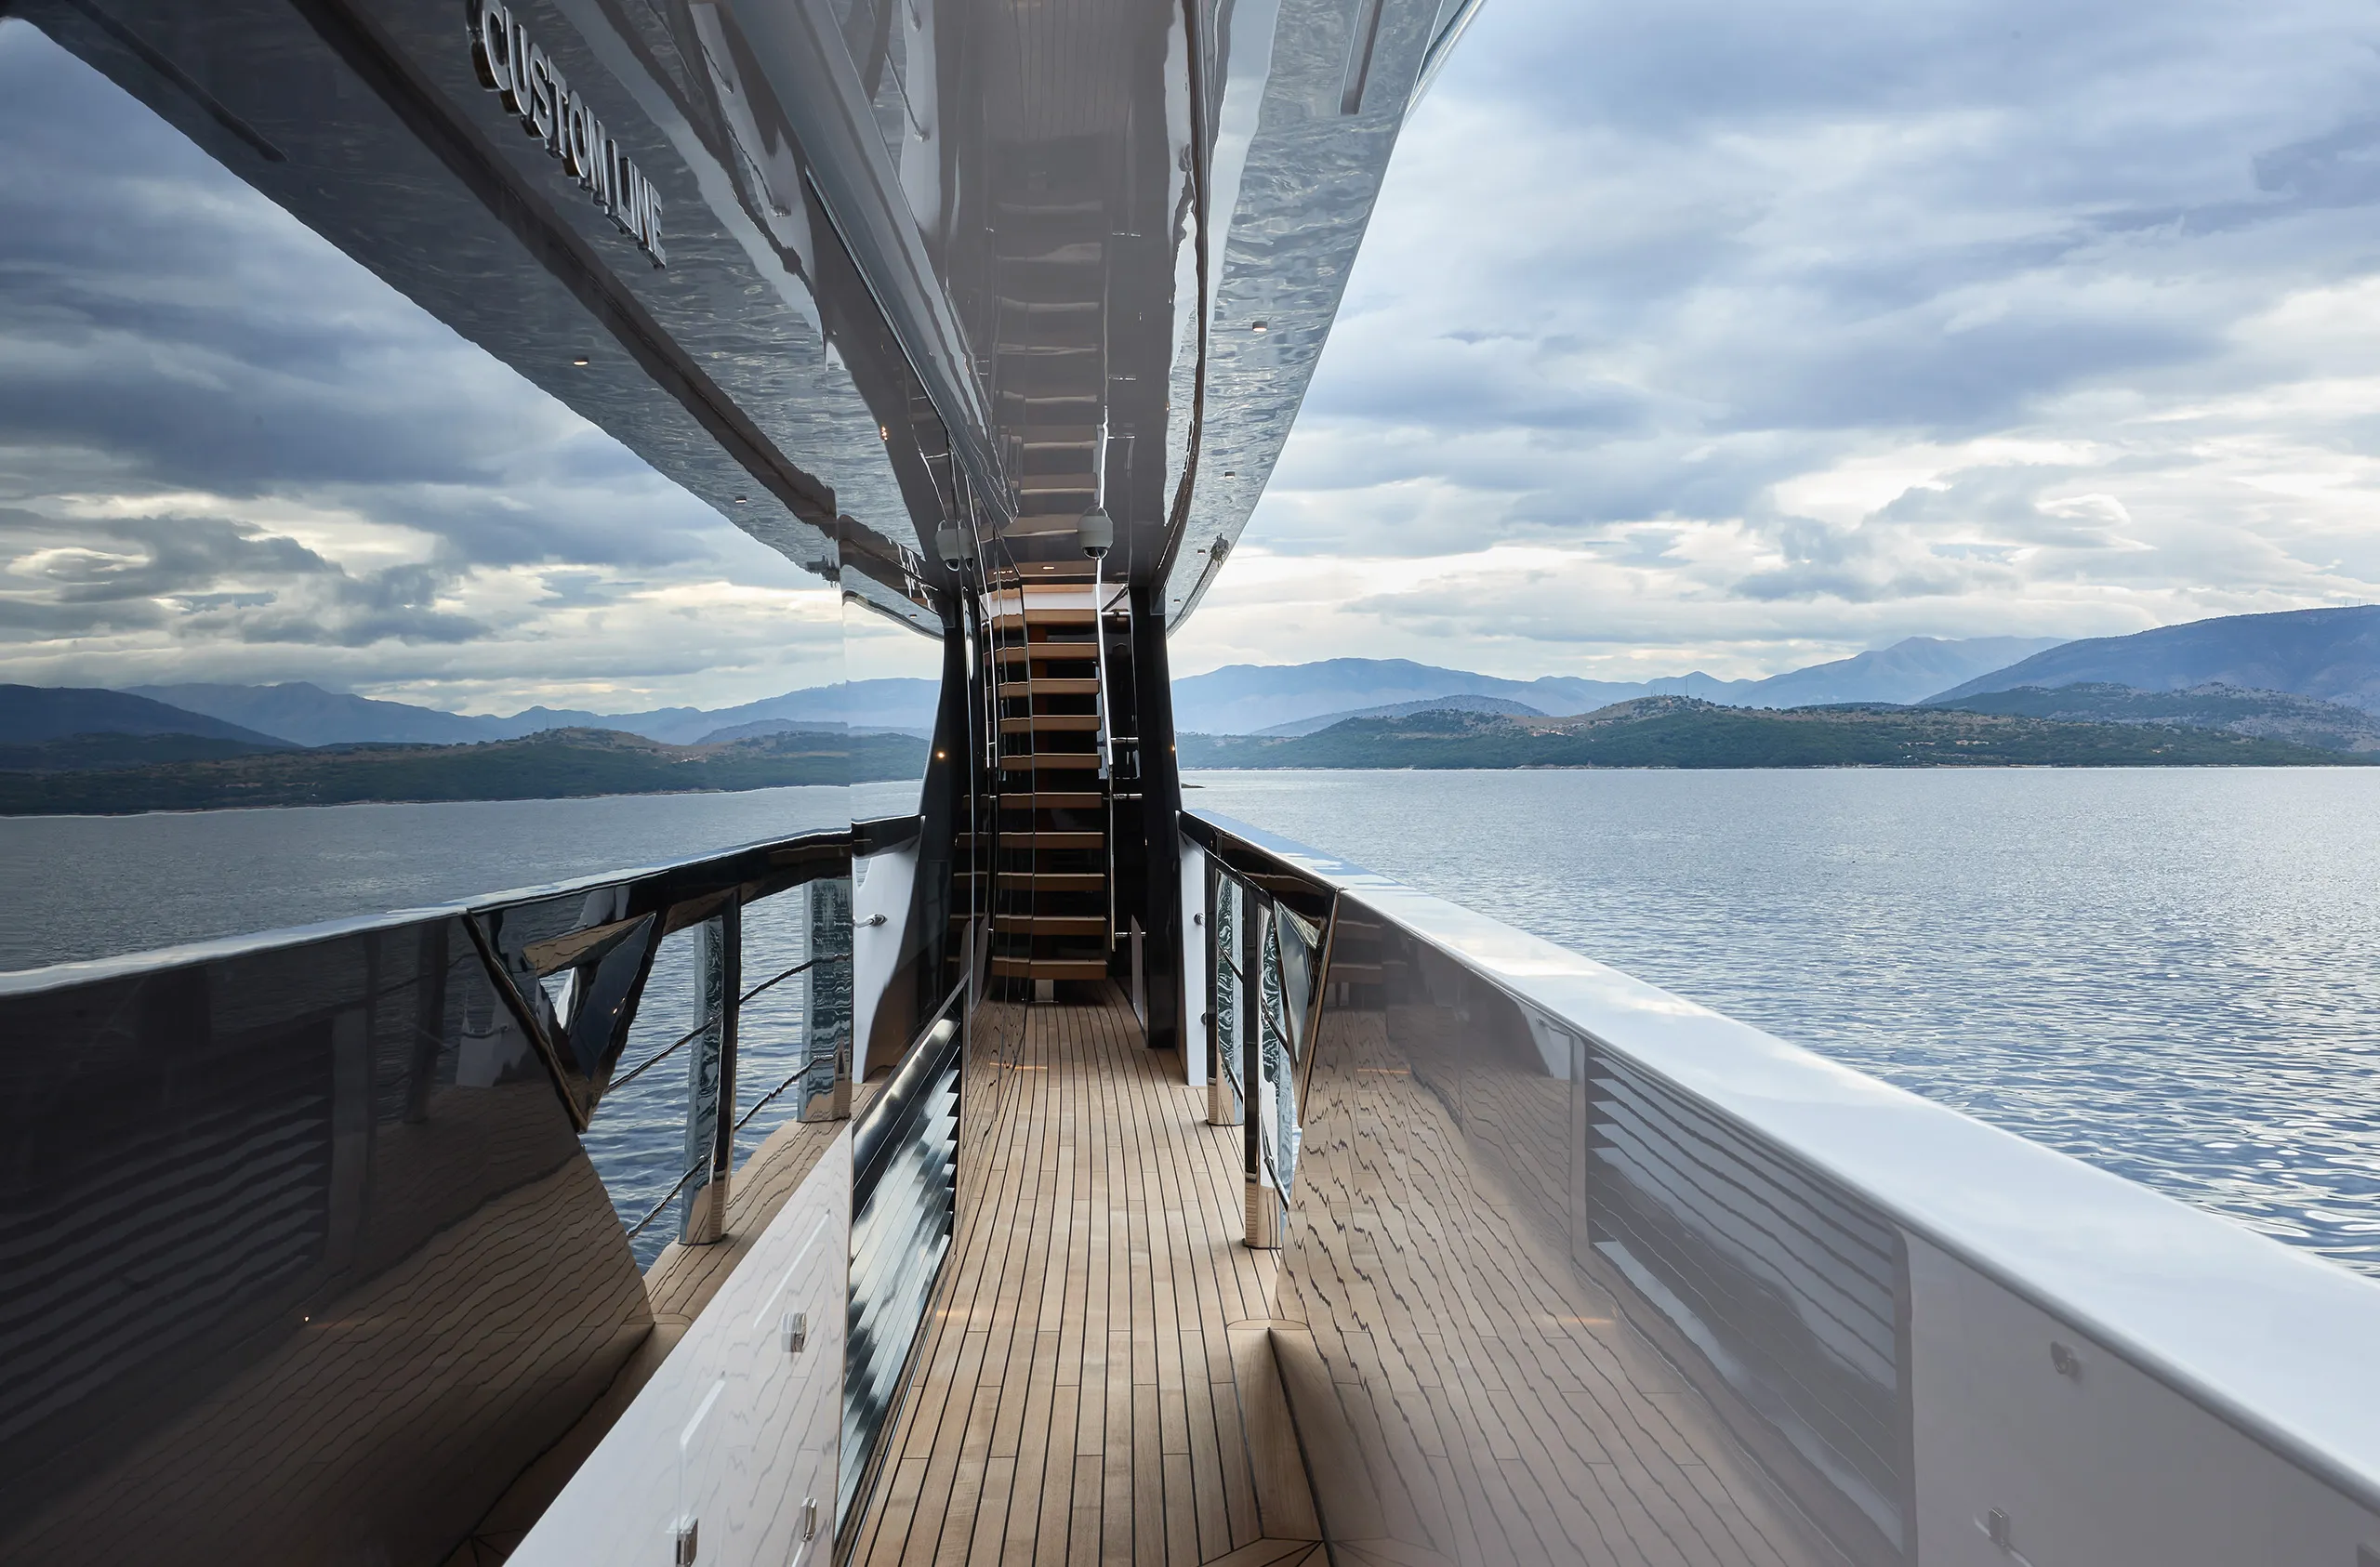 A side deck onboard the Custom Line 106 superyacht, there is a moody sky reflected in the side details of the boat